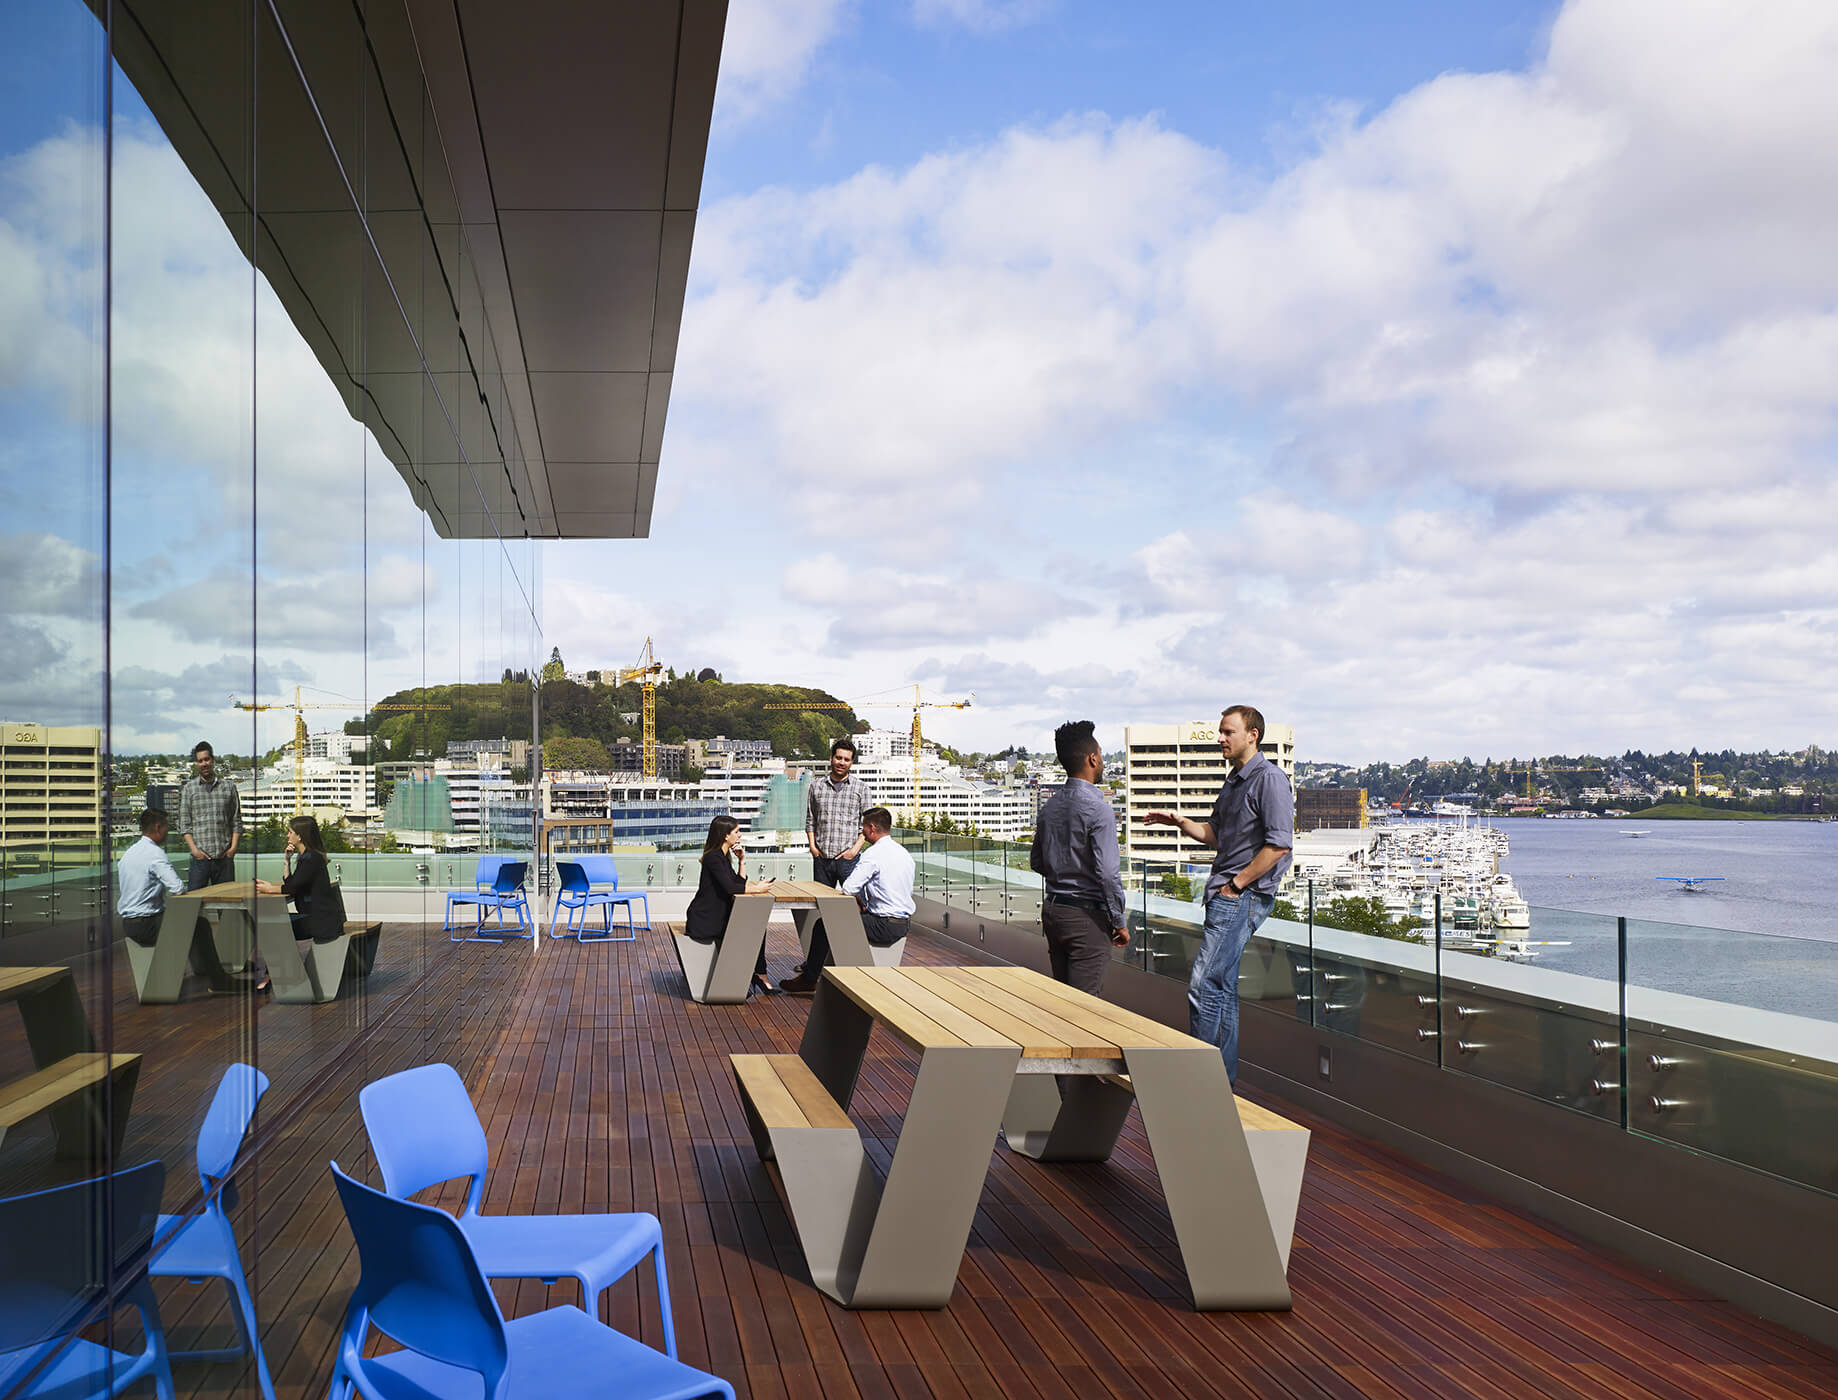 People relaxing and casually talking on deck with views to Lake Union